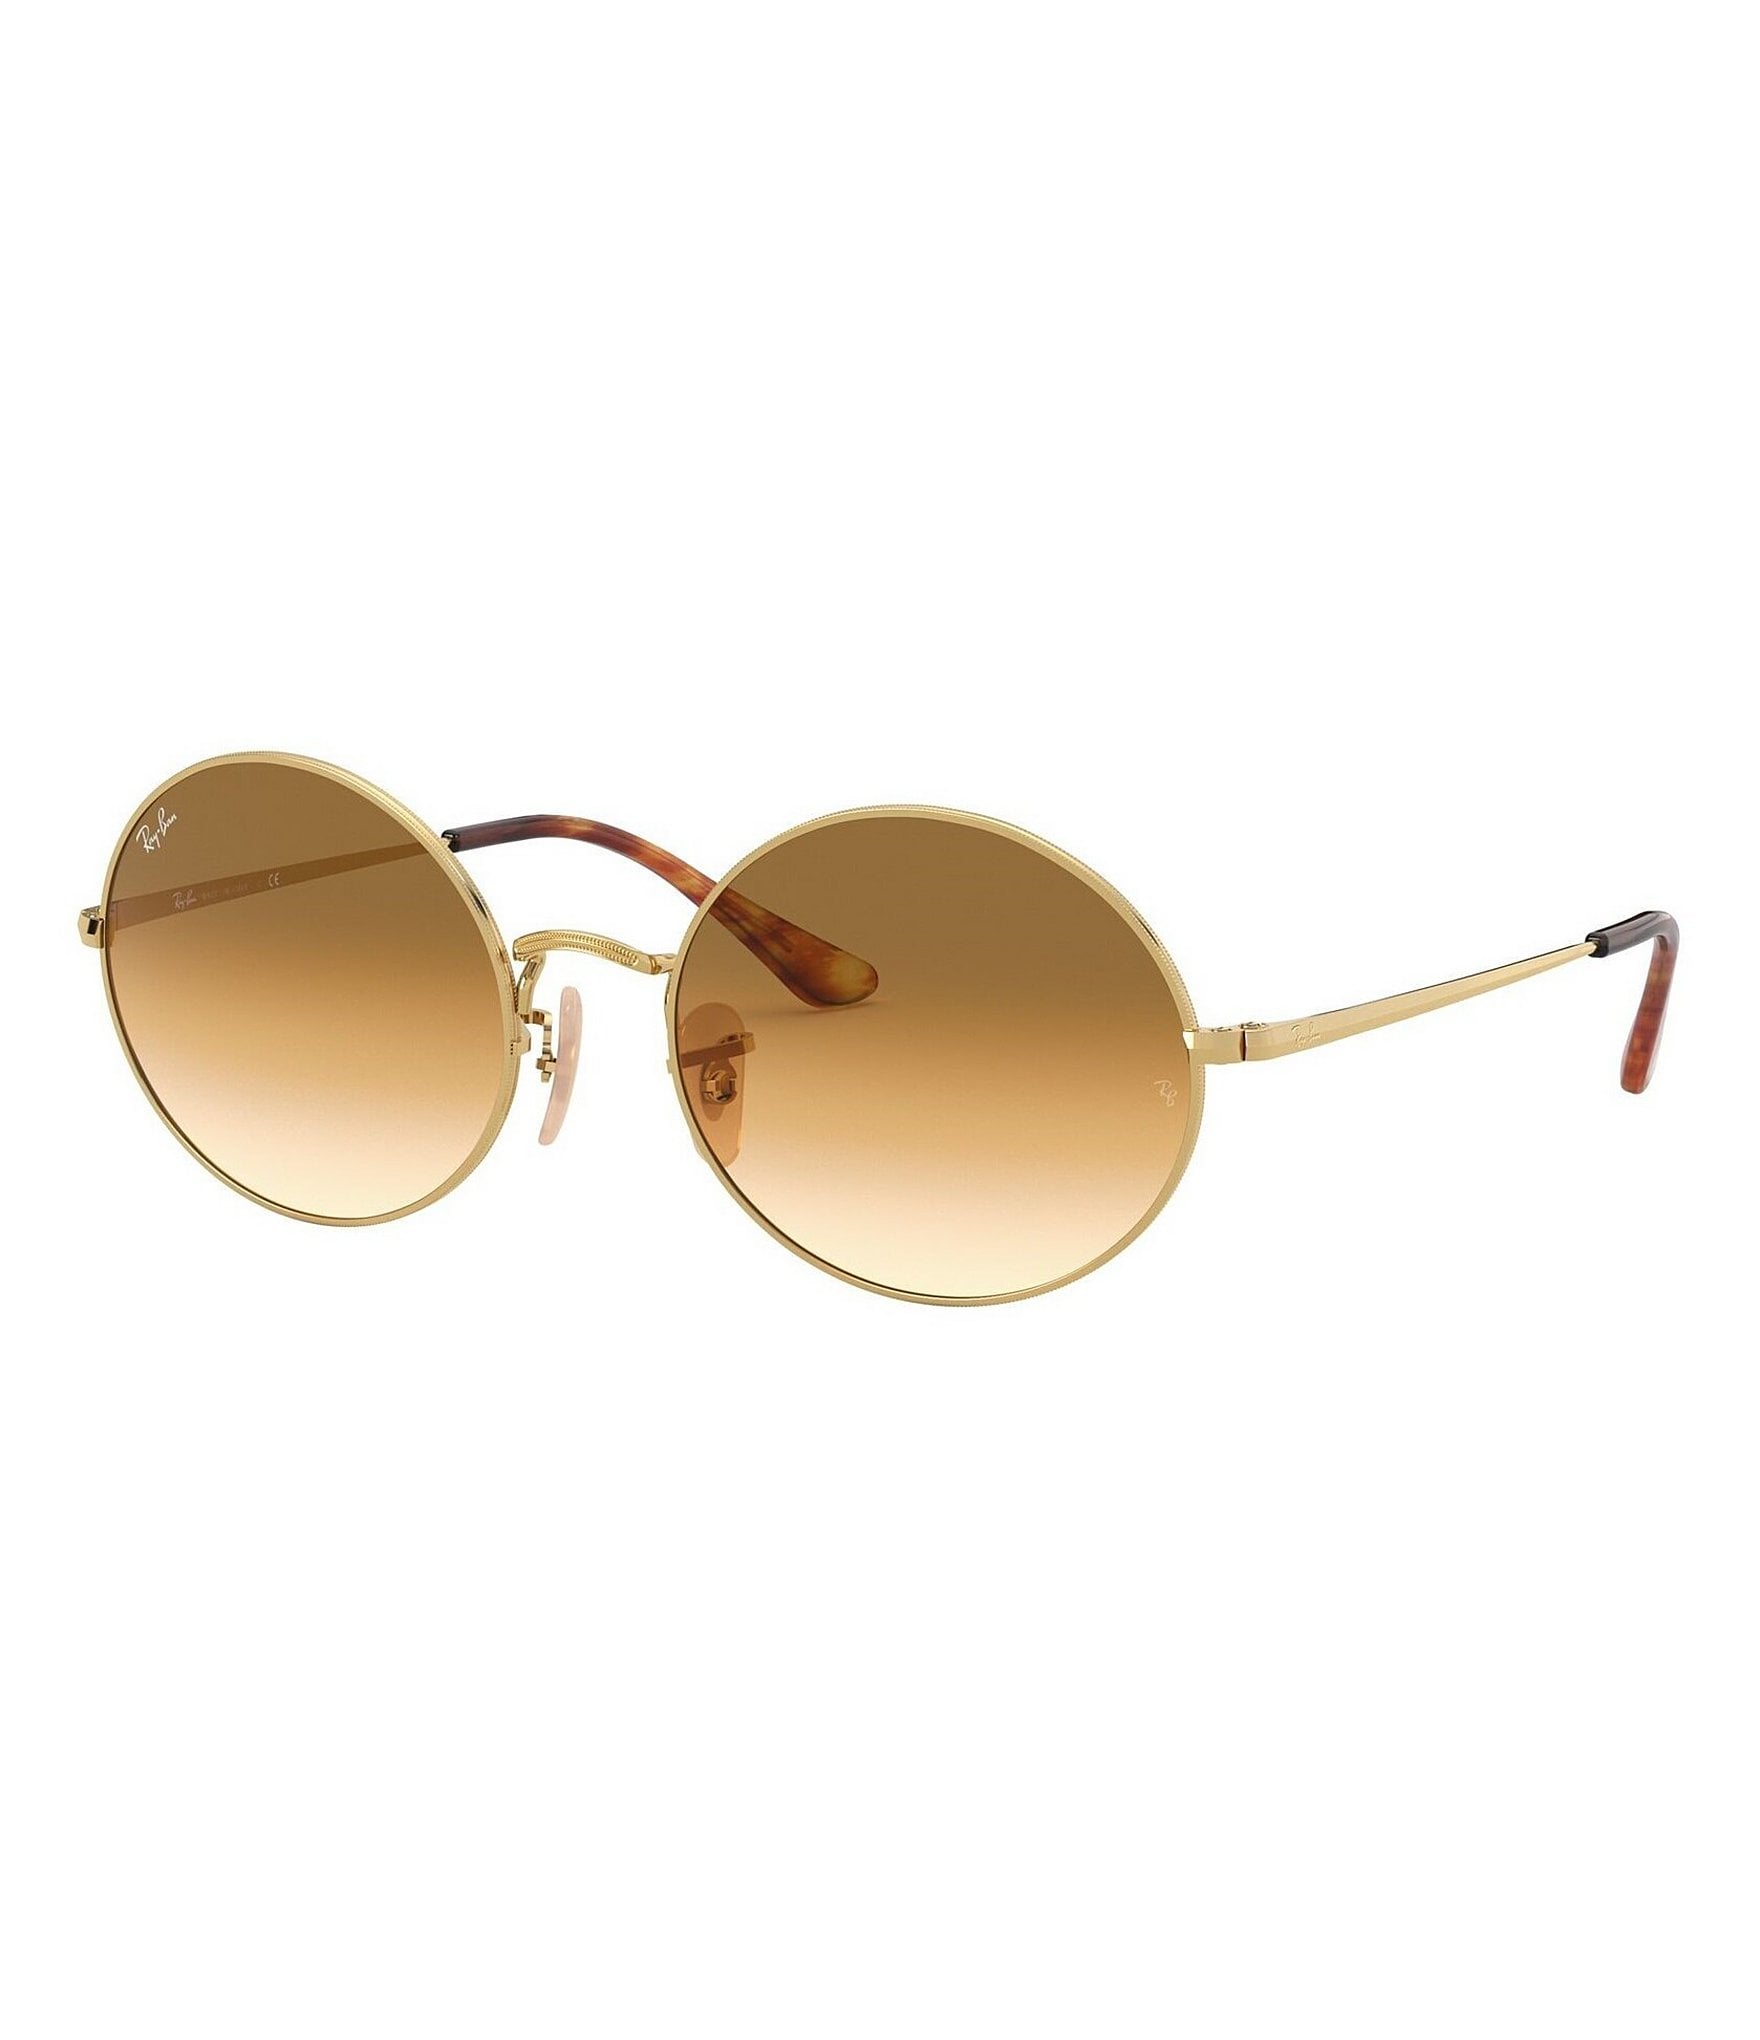 Ray-Ban Icons Legend Gold Oval Frame Sunglasses | Dillard's